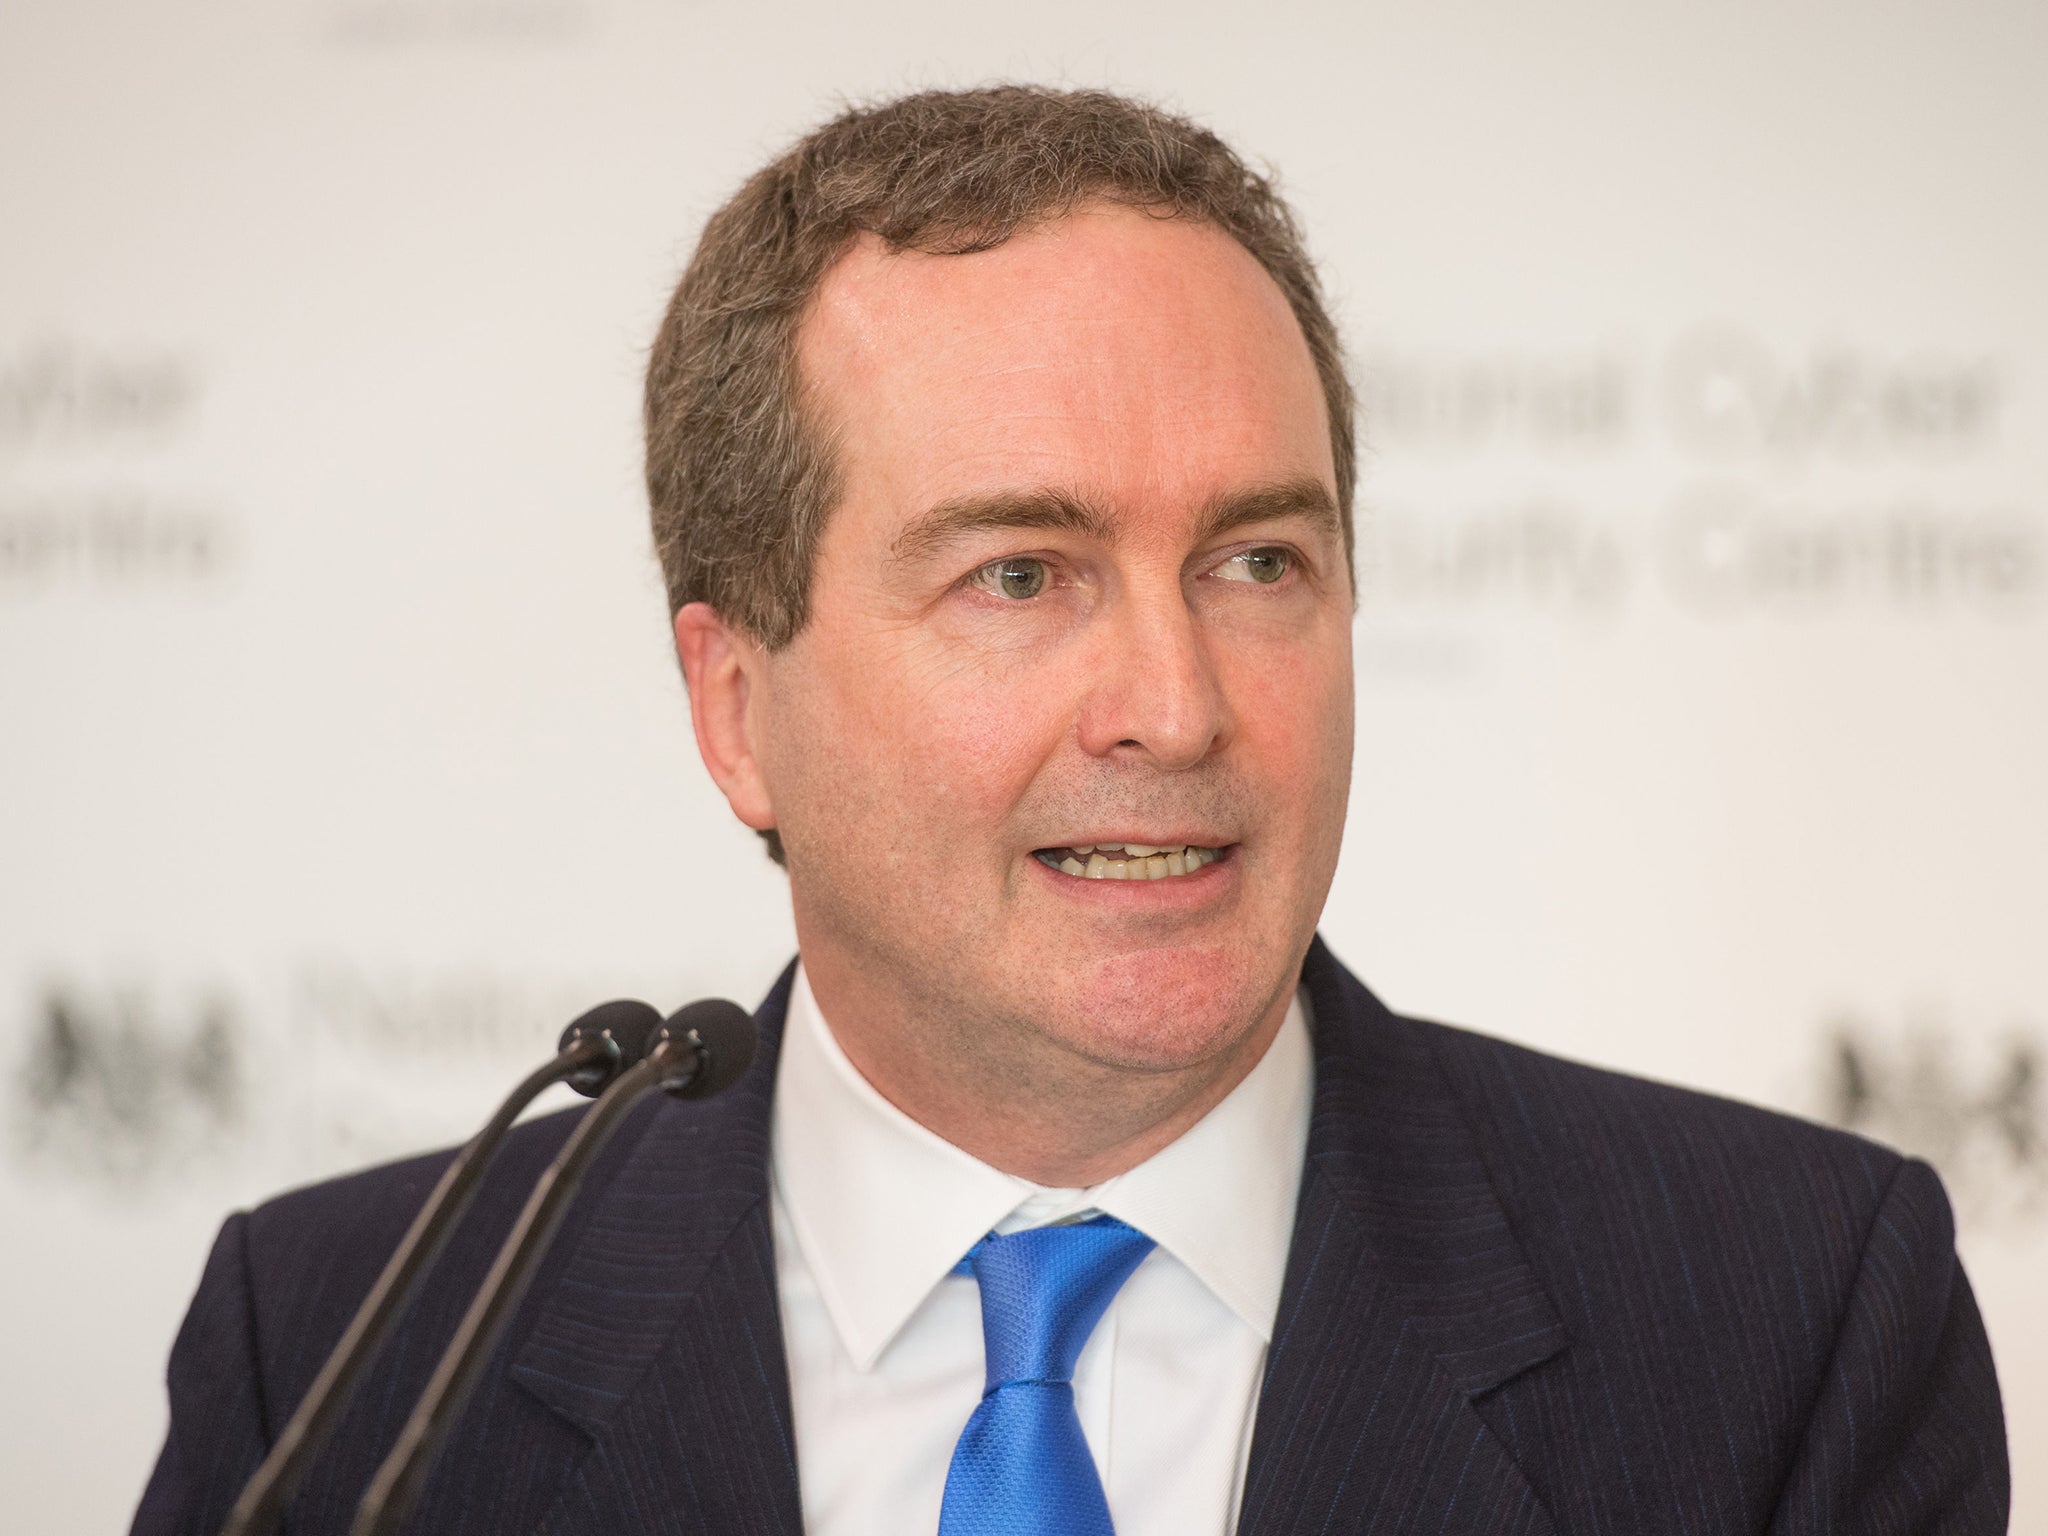 Robert Hannigan stood down as director of GCHQ in 2017 after less than three years in the post, citing ‘family reasons’